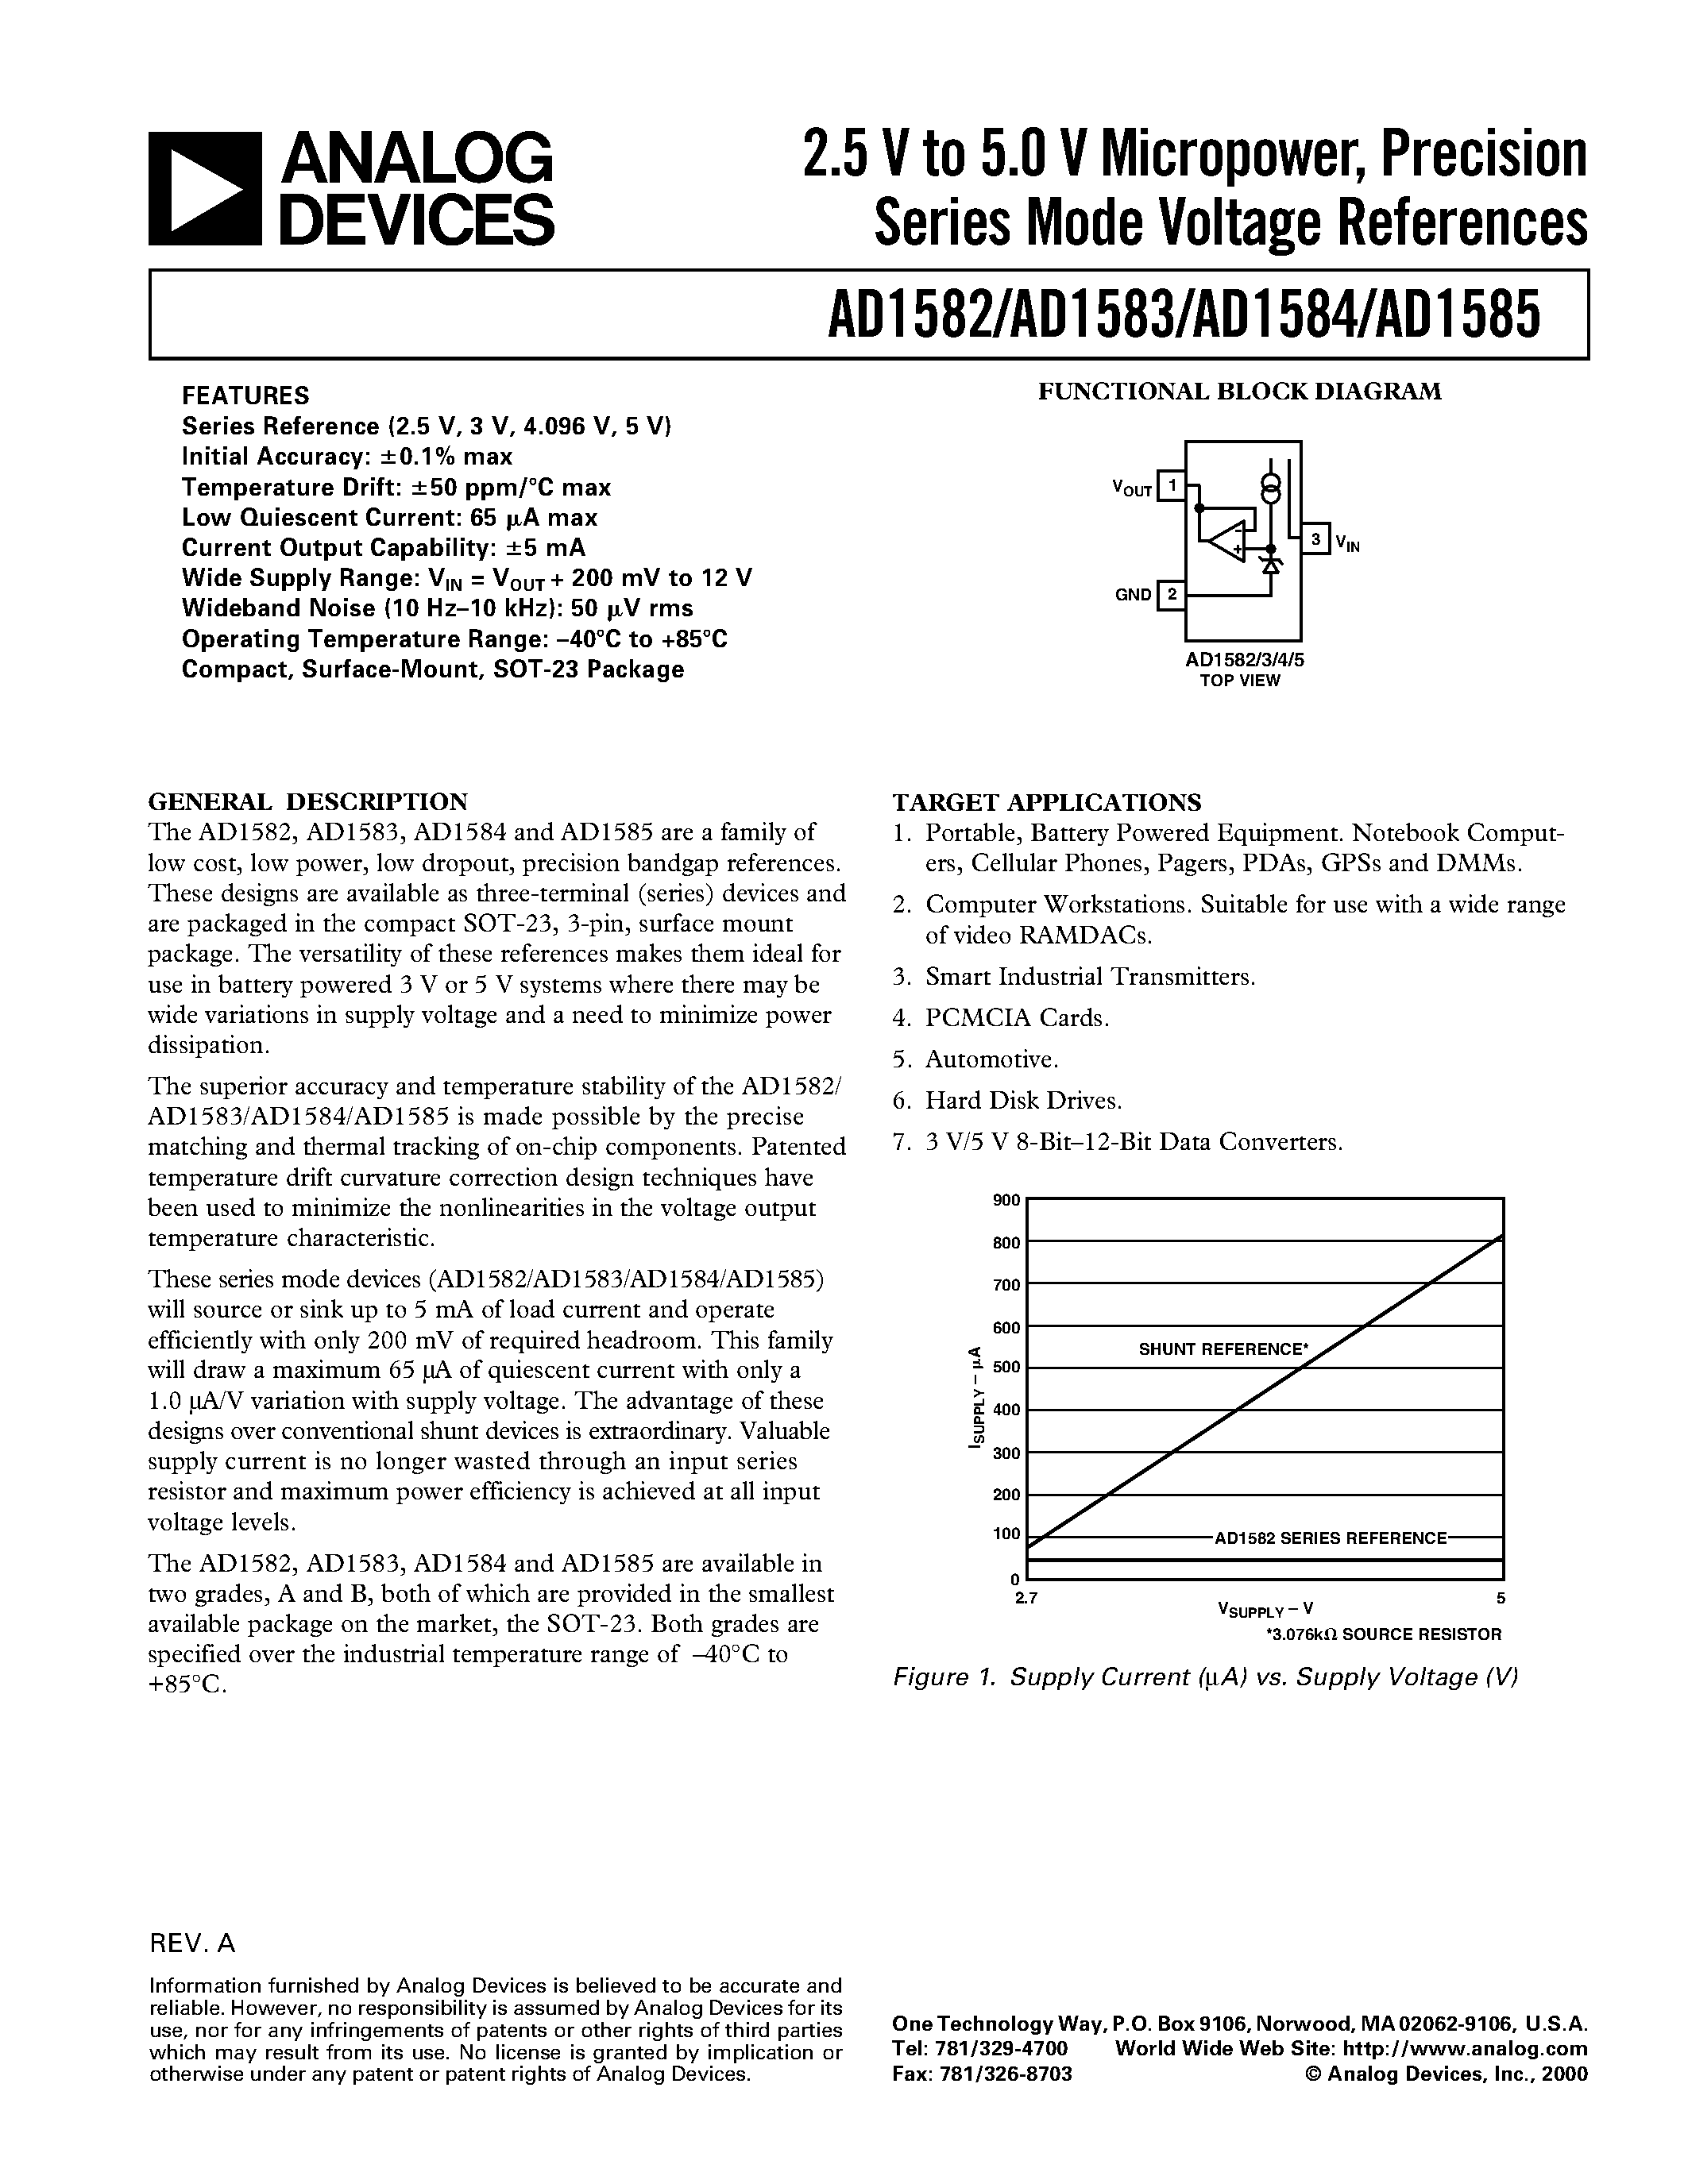 Datasheet AD1583 - 2.5 V to 5.0 V Micropower/ Precision Series Mode Voltage References page 1